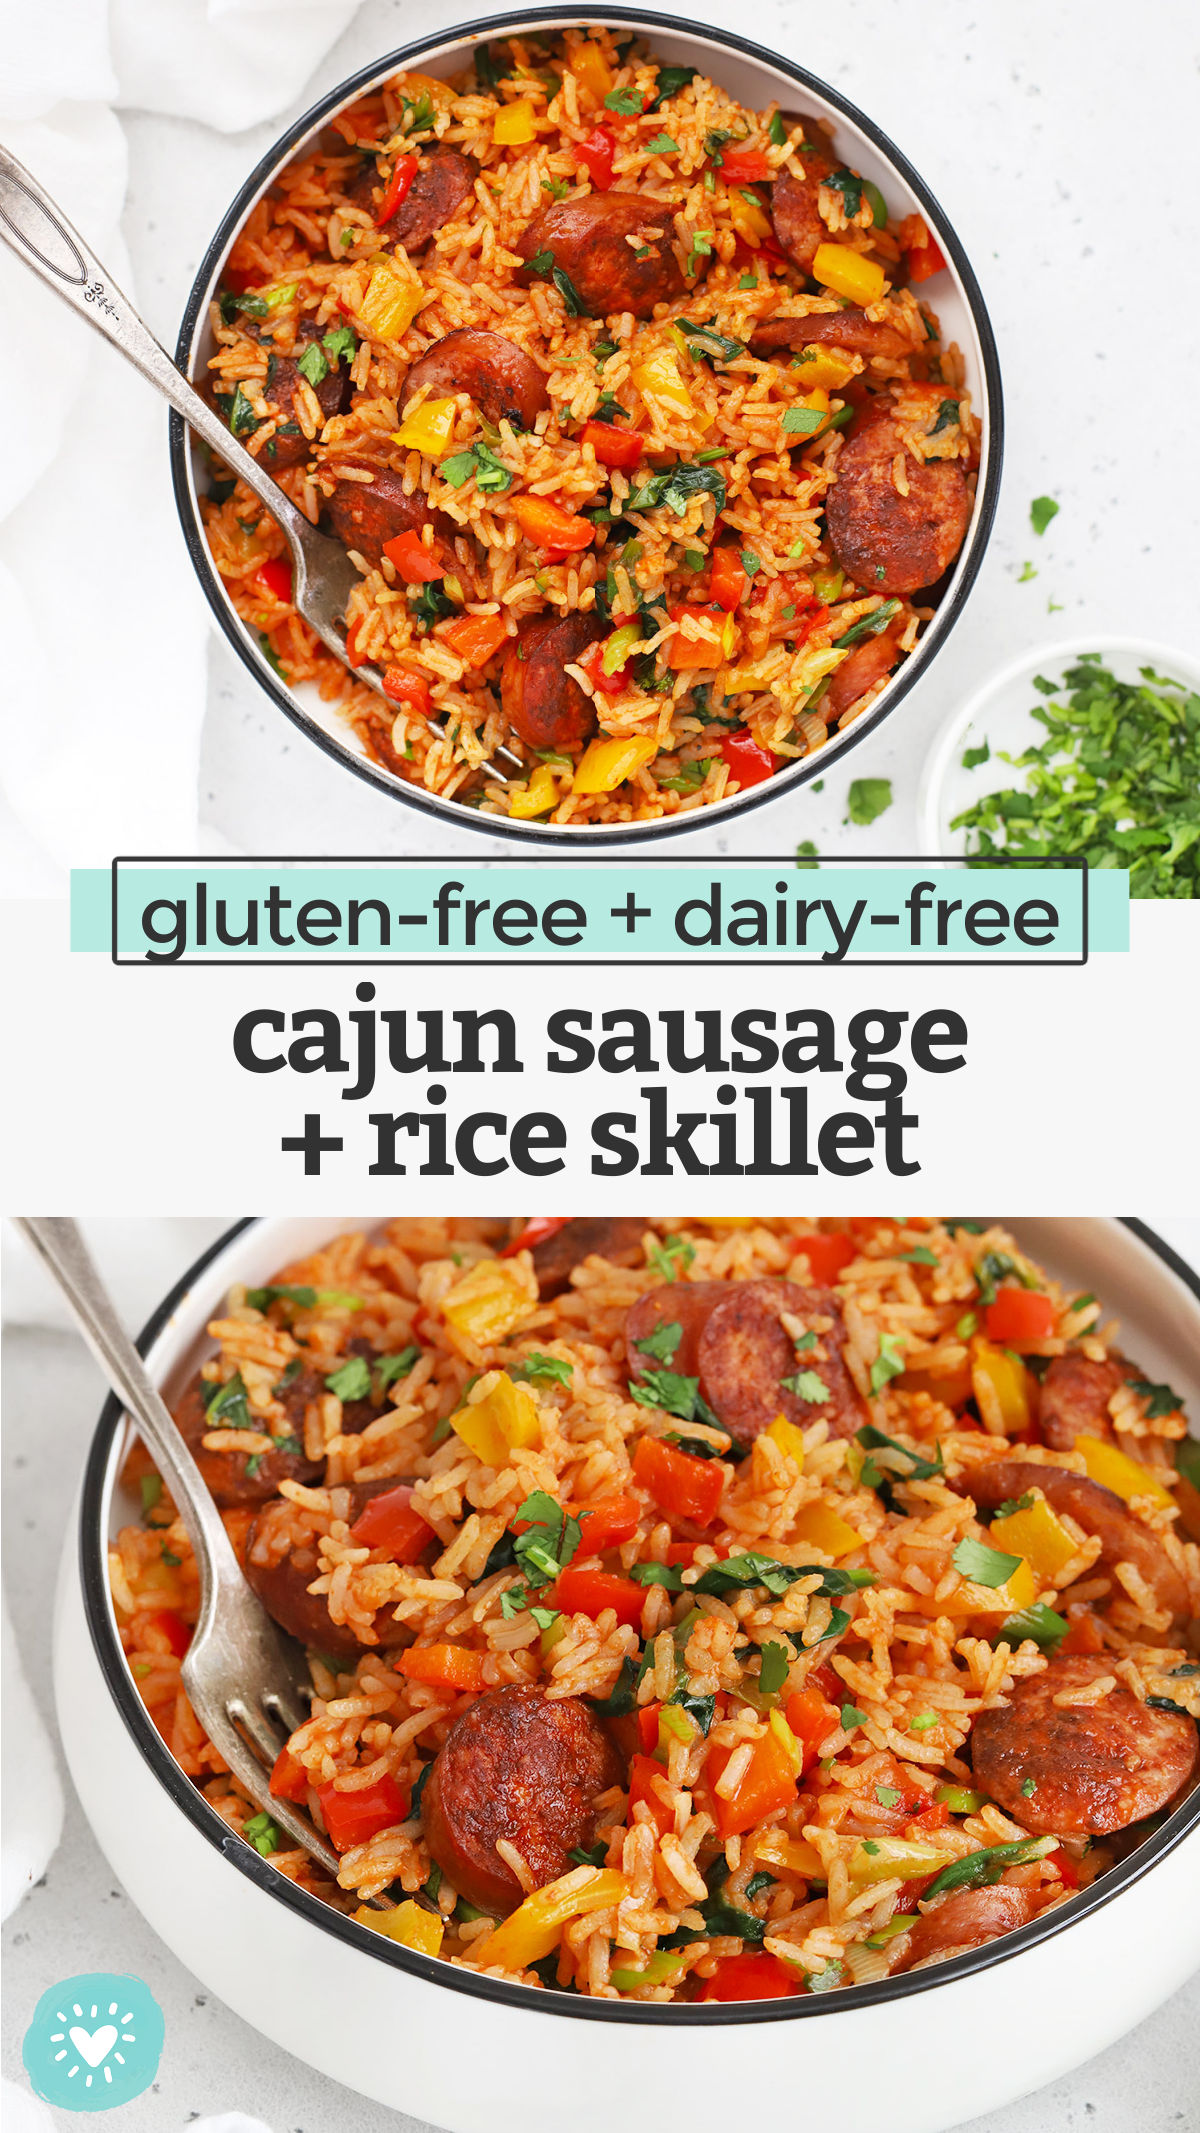 Cajun Sausage and Rice Skillet - This easy one pan dinner comes together in a flash, but packs some serious flavor! A family-friendly dinner that's easy enough to make any night of the week! (Gluten-Free, Dairy-Free) // One-Pan Dinner // Easy Dinner // Cajun Rice // Gluten-Free Dinner #glutenfree #easydinner #rice #onepan #skillet